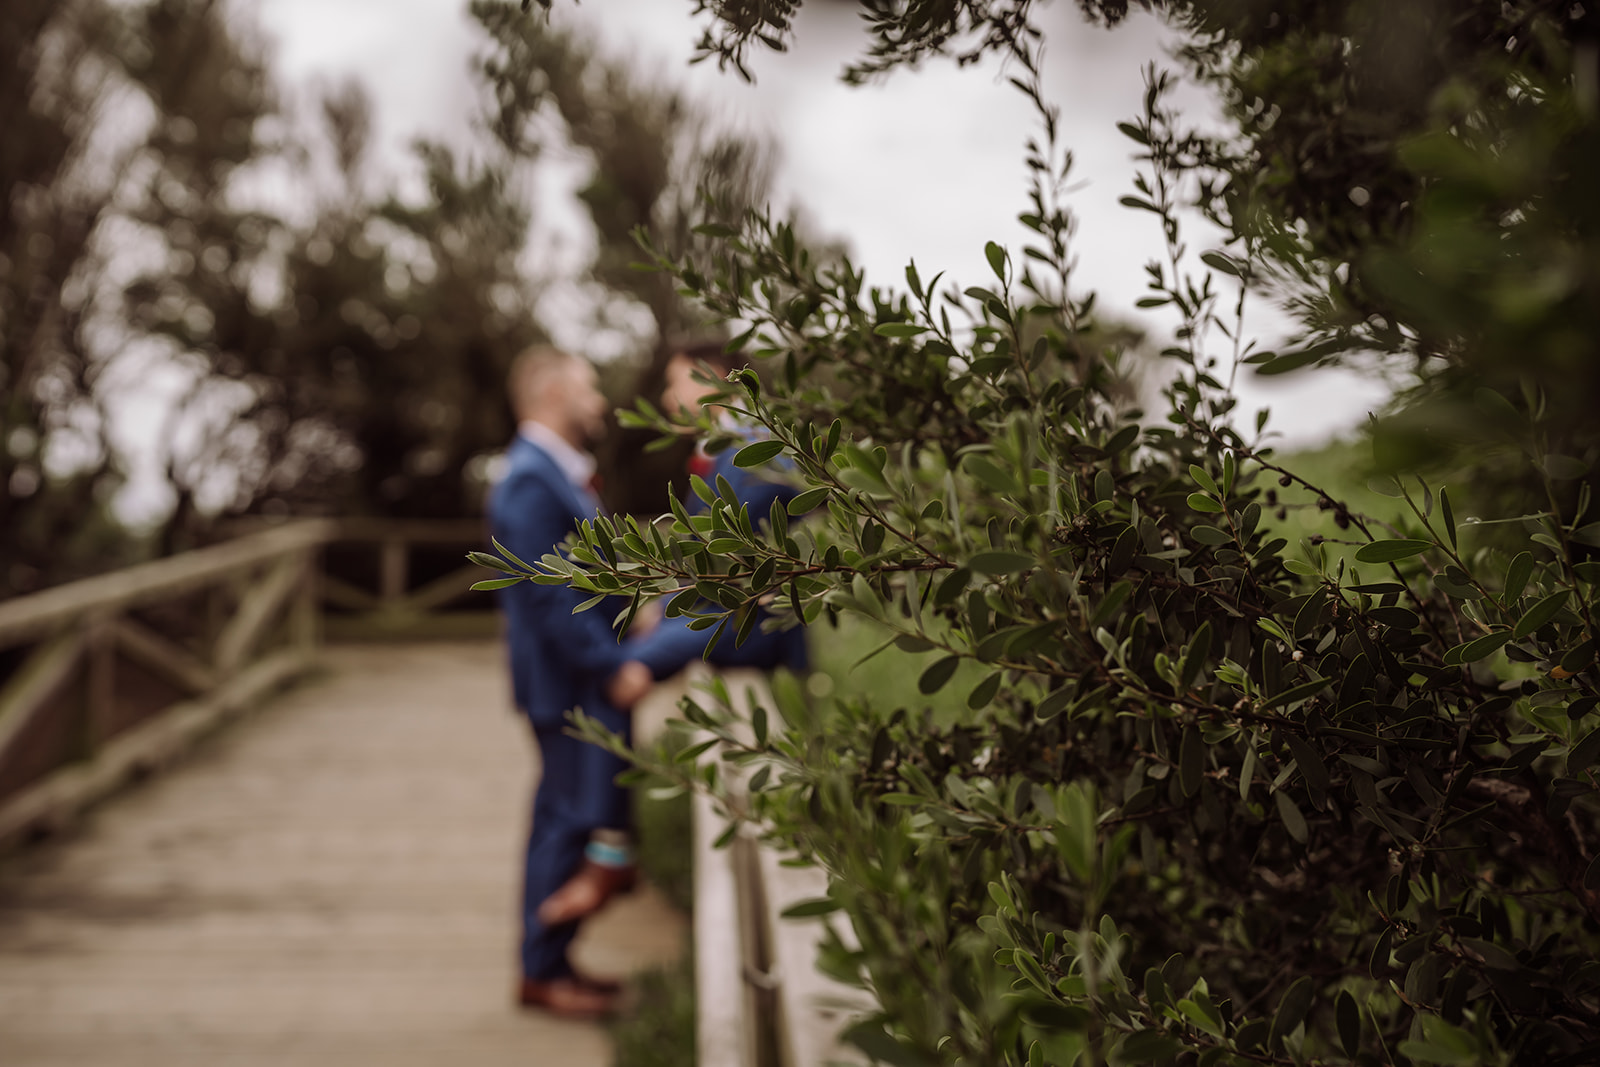 Bay Area Oakland wedding photographer, Xilo Photography, Kati Douglas, took this picture of a same sex gay couple on their wedding day/elopement day as the two grooms pose on a bridge in Fort Funston, CA